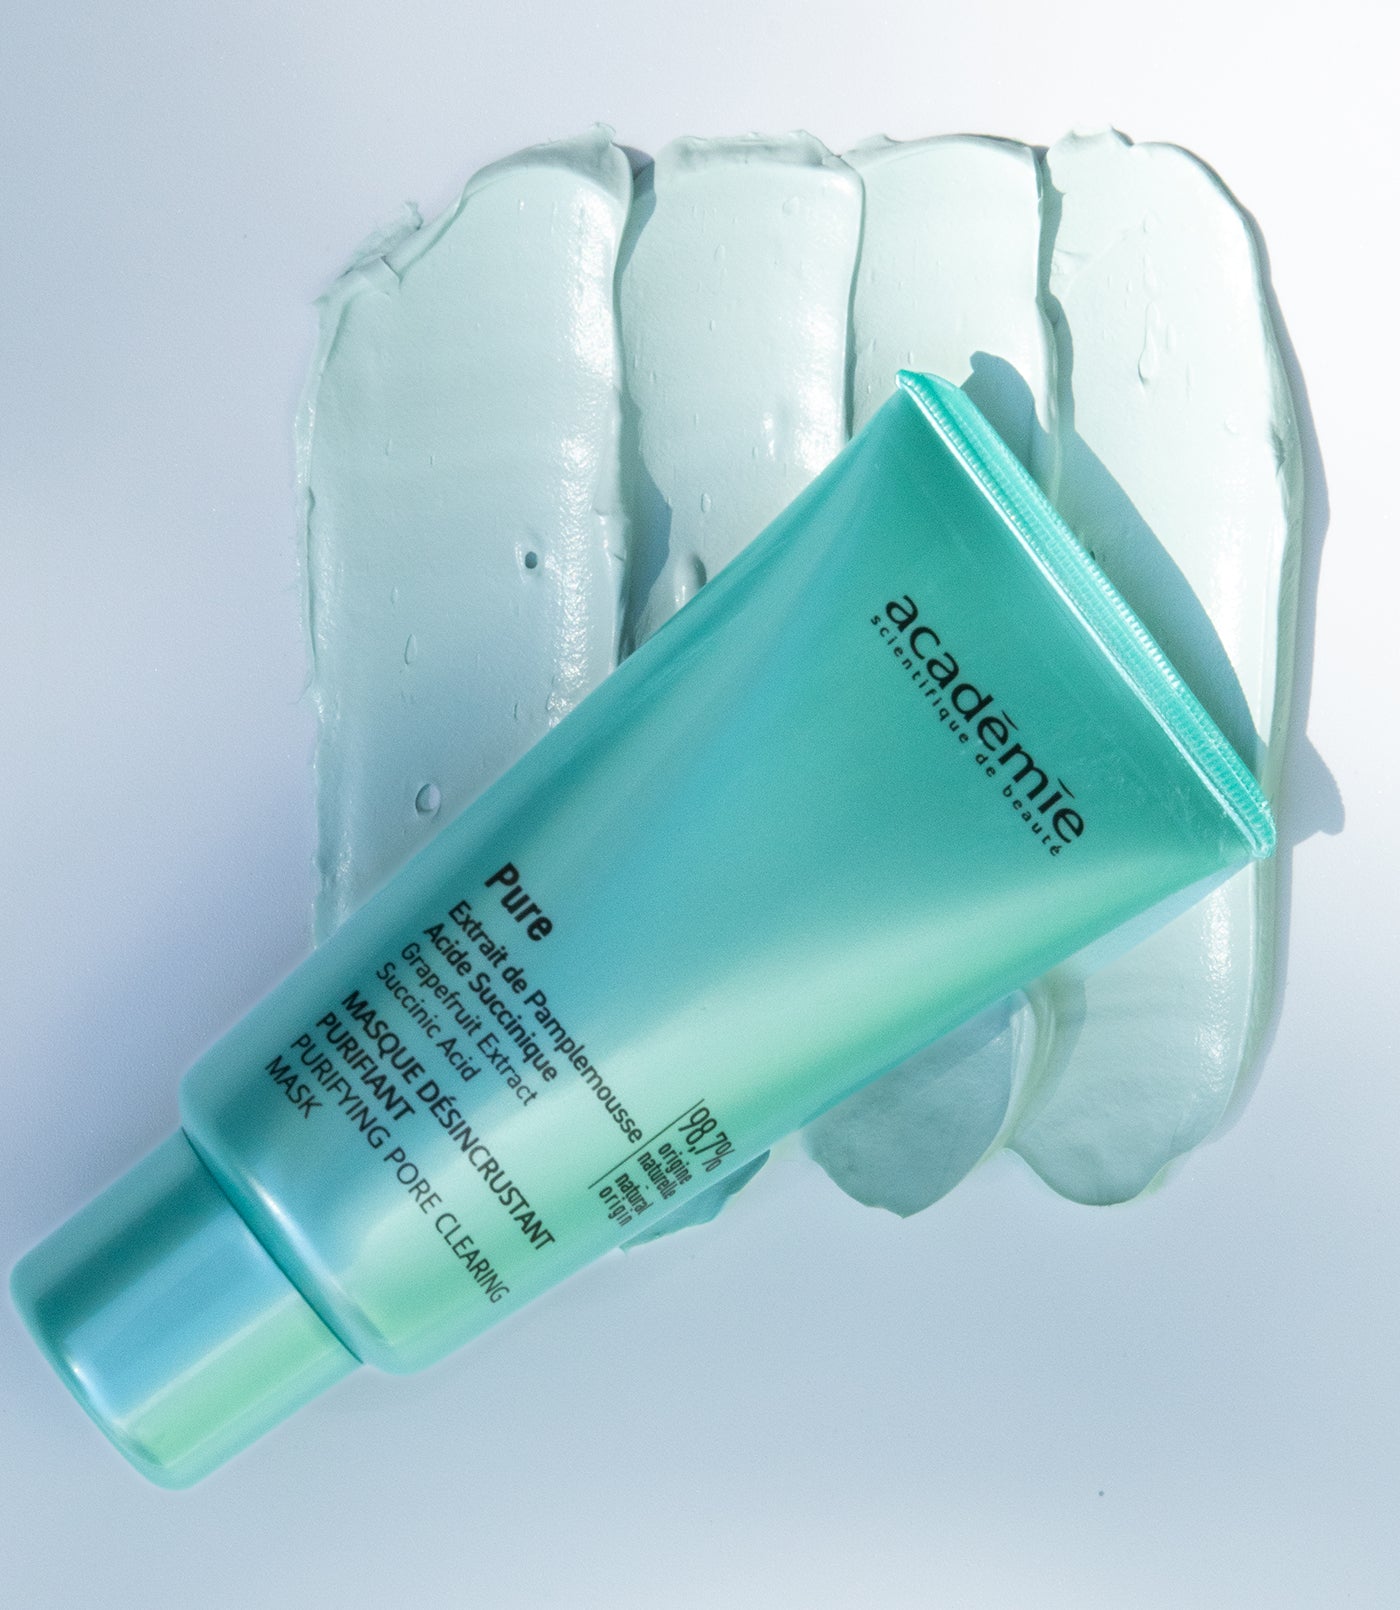 Purifying Pore Clearing Mask